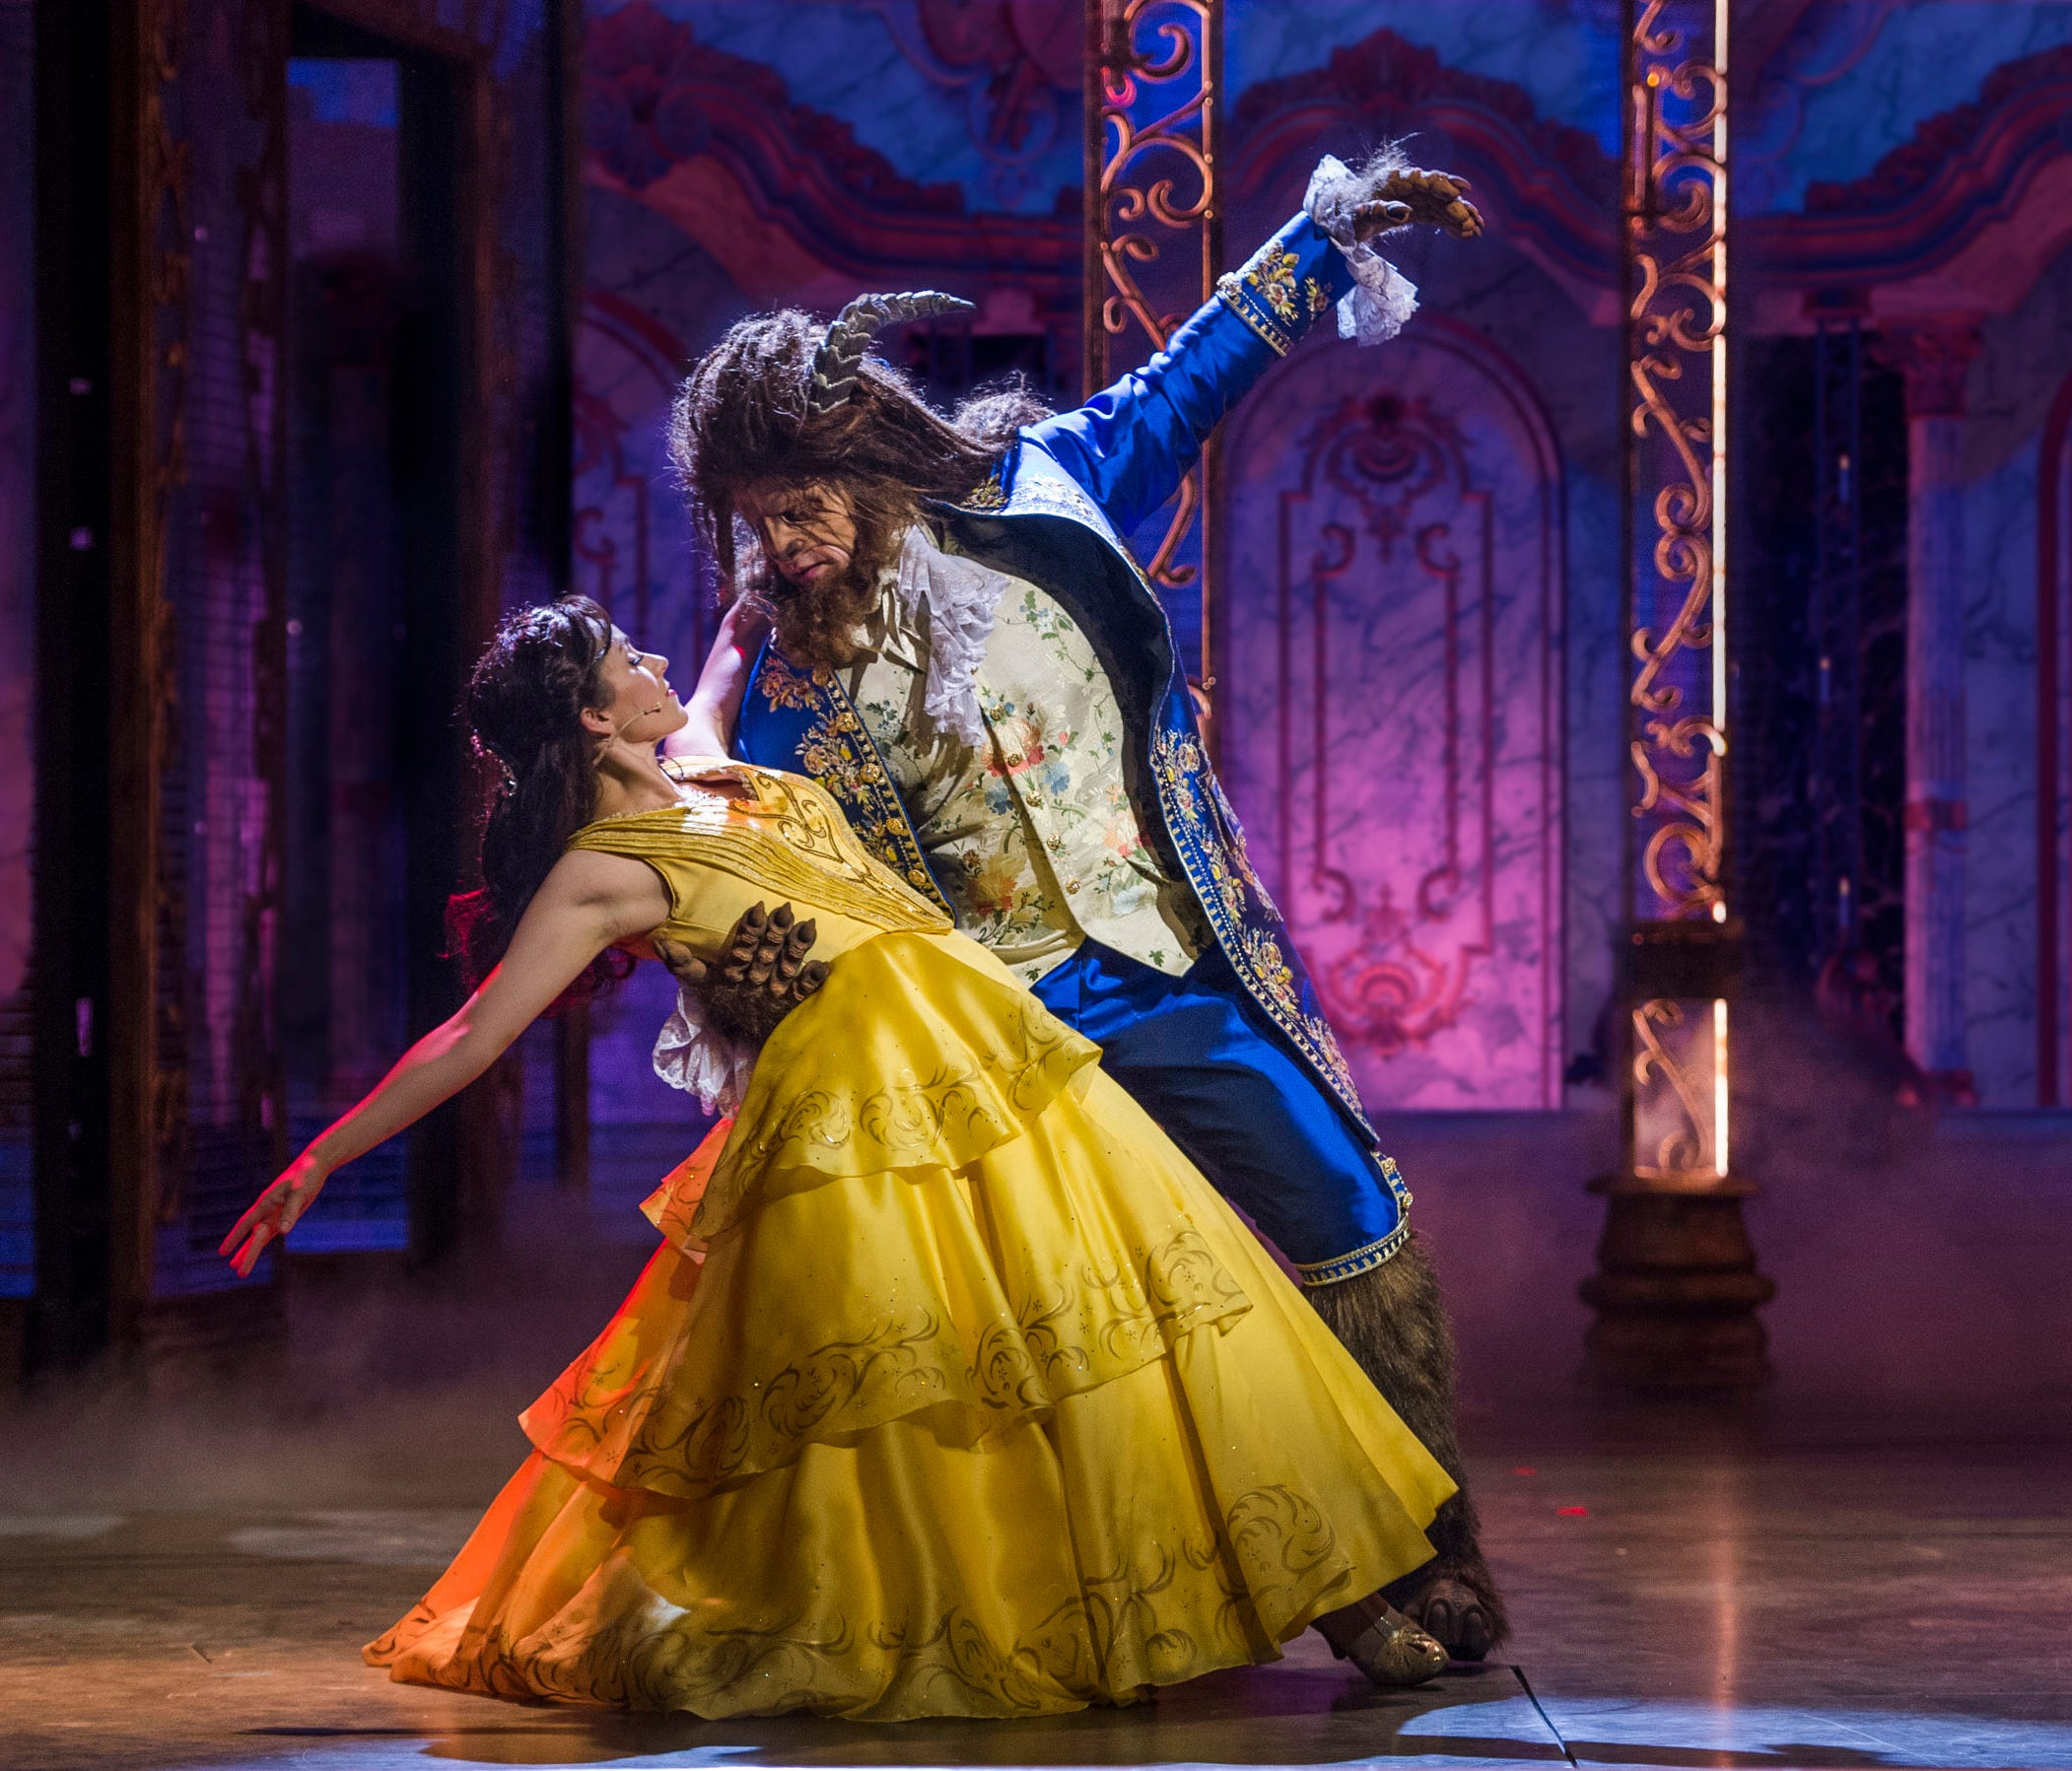 A live musical version of 'Beauty and the Beast' is now playing on Disney Cruise Line's Disney Dream.